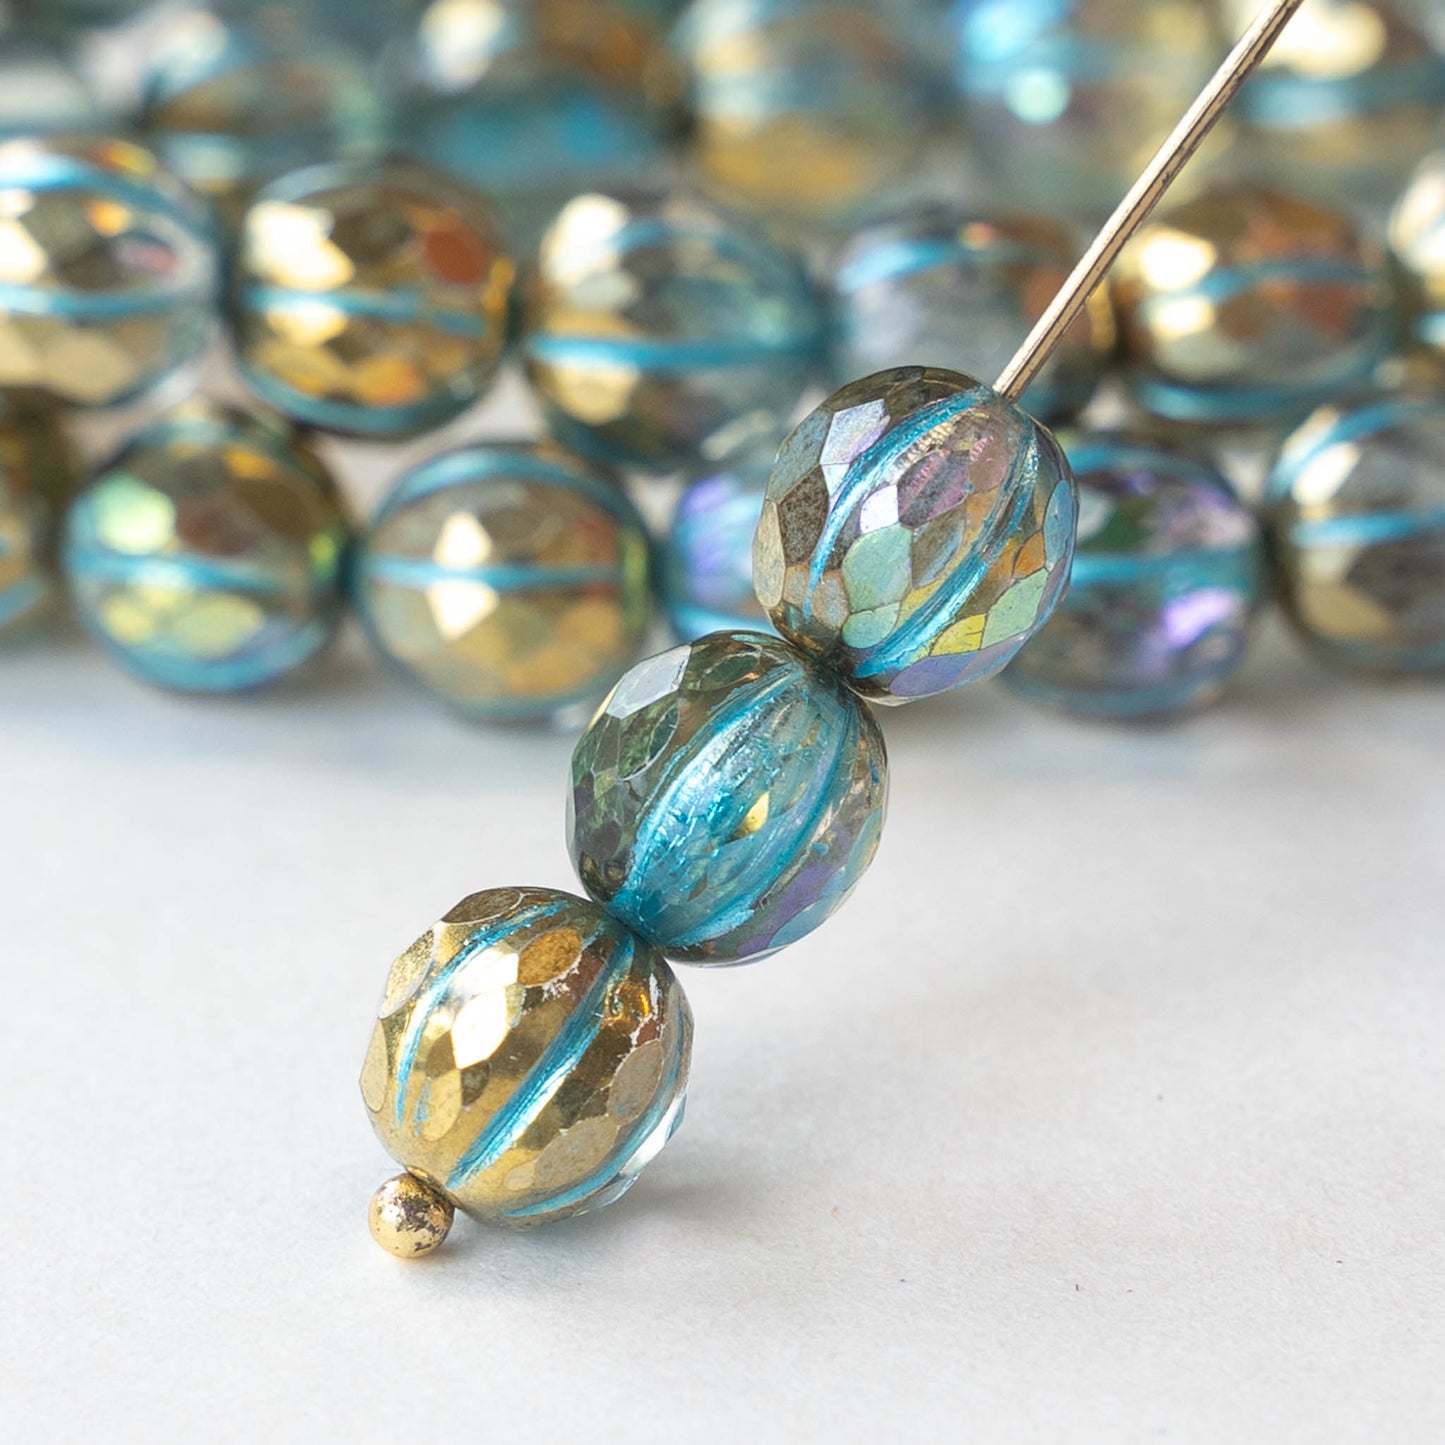 8mm Faceted Round Melon Beads - Emerald with Cobalt Finish and